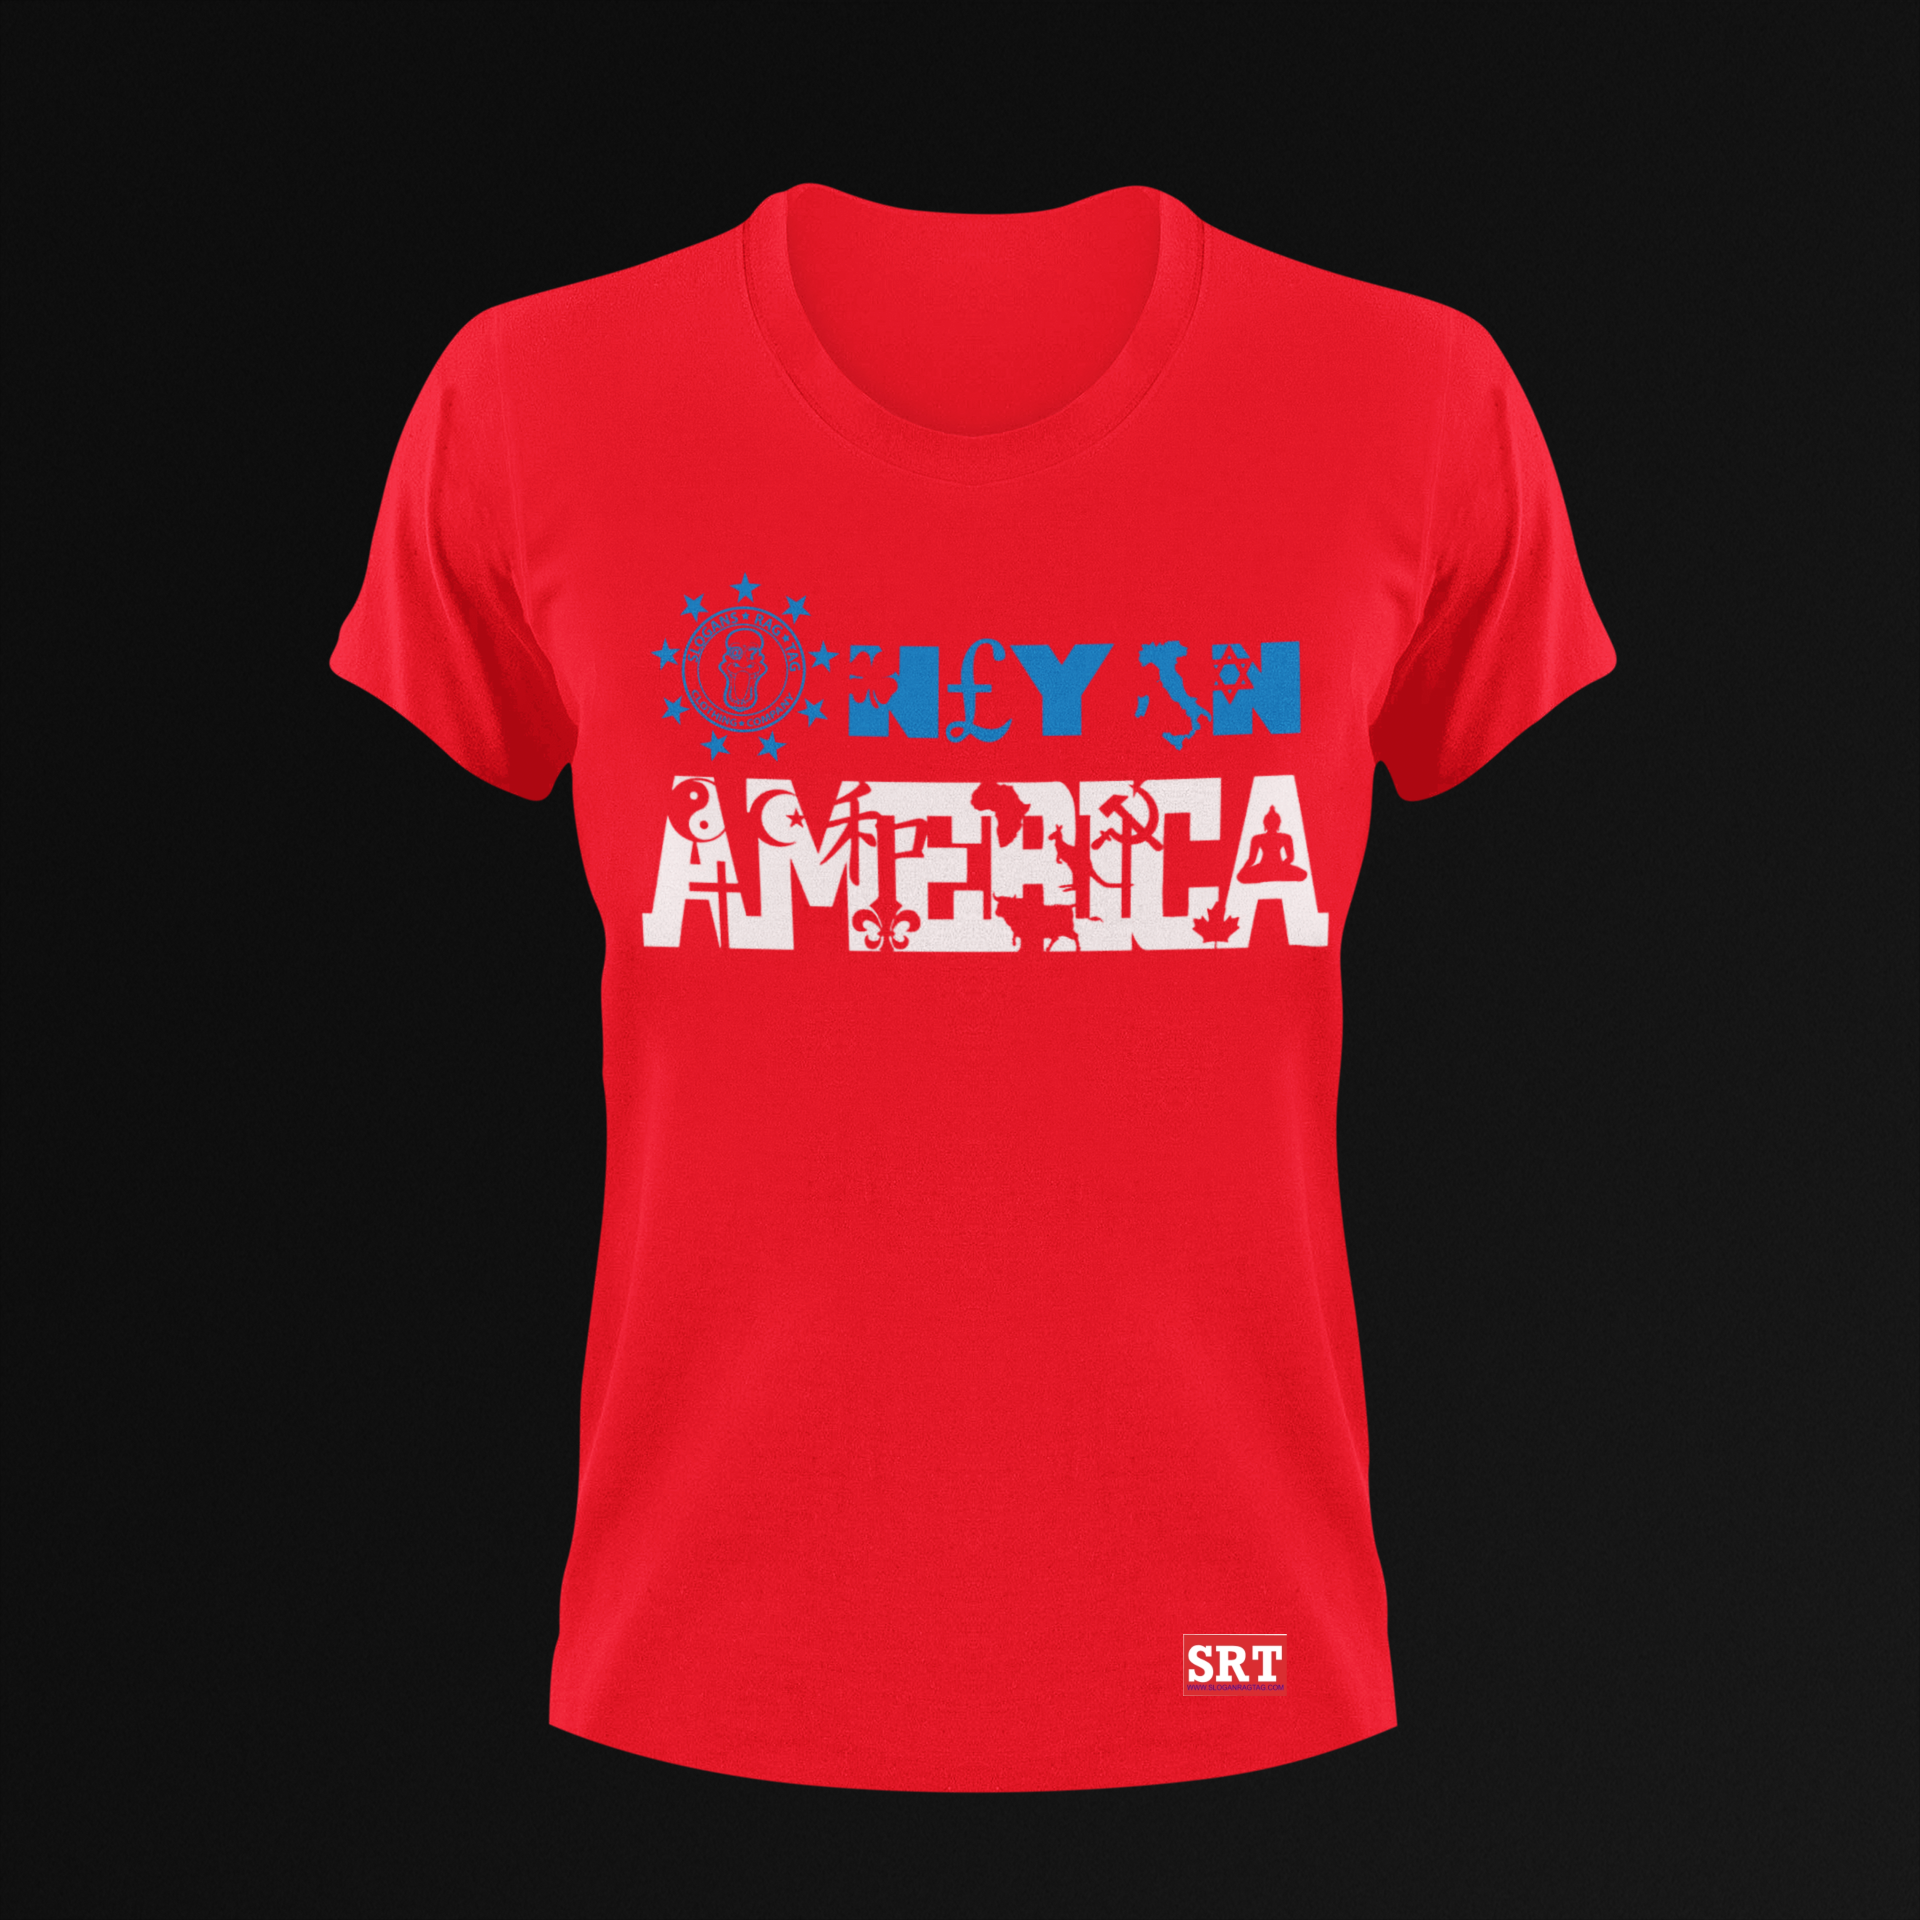 Only in America Men's T-Shirt